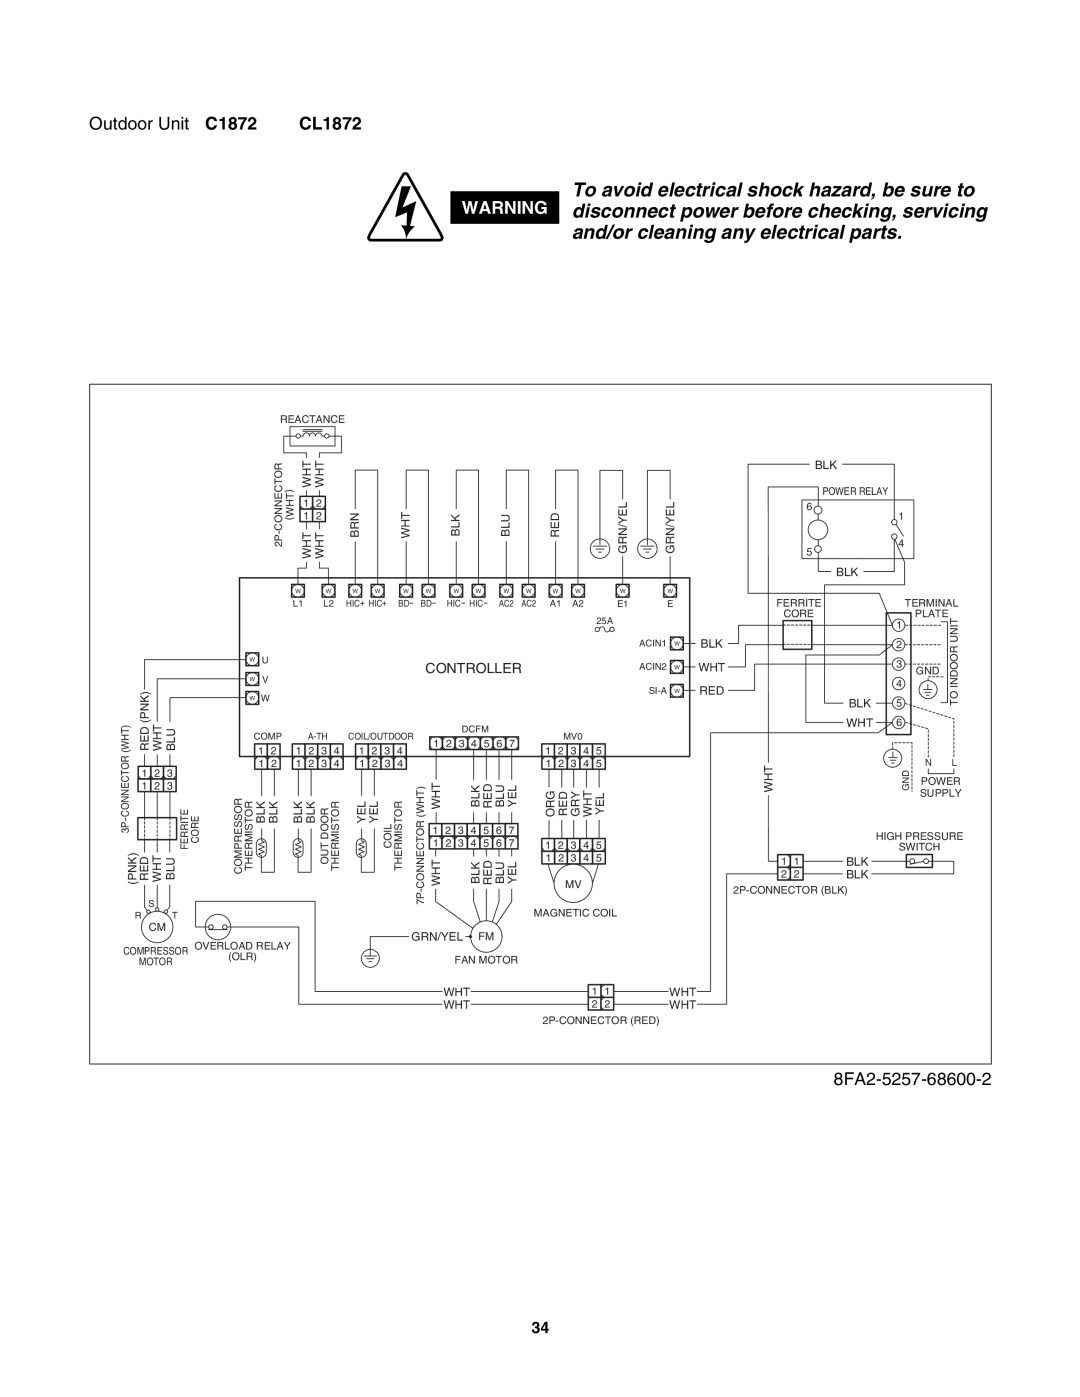 Sanyo CL2472, C2472 service manual and/or cleaning any electrical parts, Outdoor Unit C1872, CL1872, 8FA2-5257-68600-2 